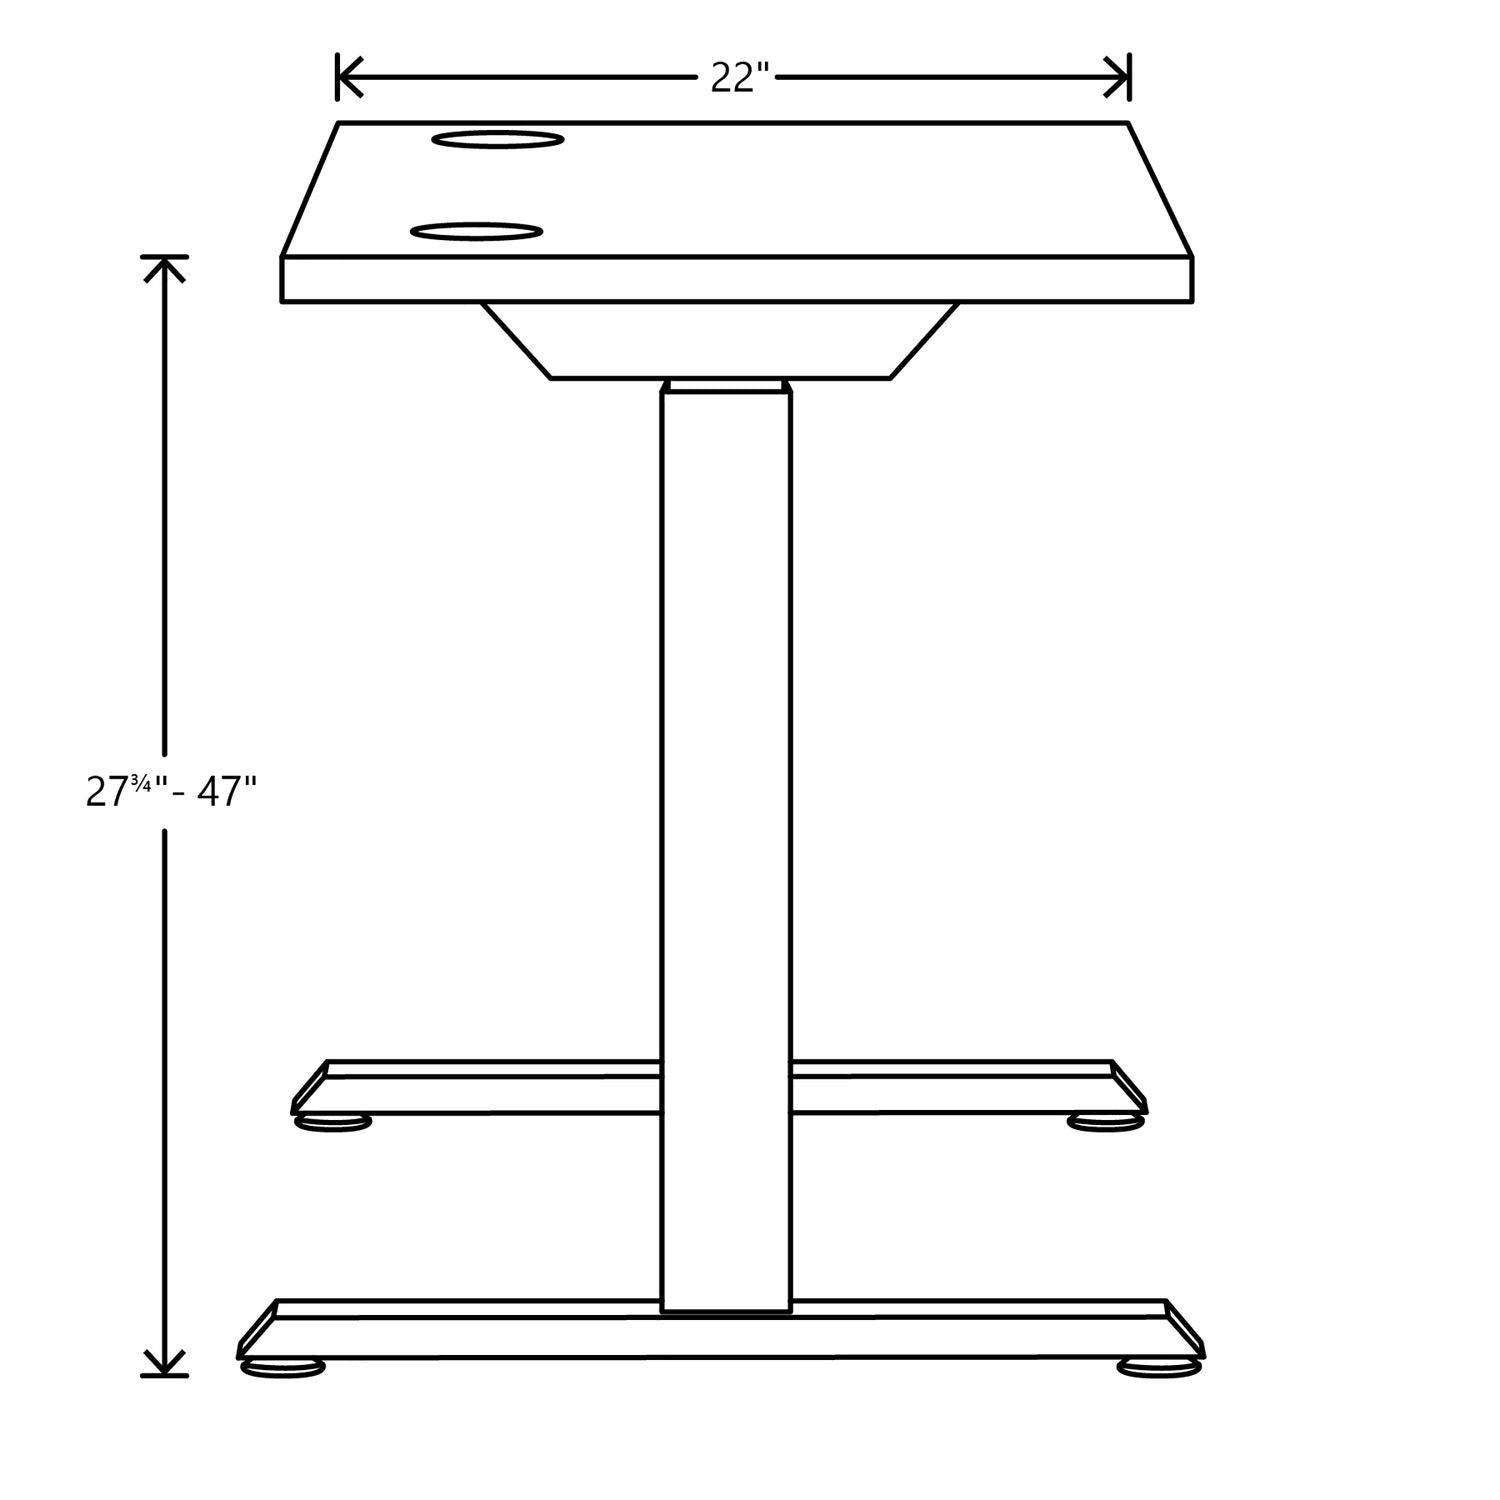 coordinate-height-adjustable-desk-bundle-2-stage-58-x-22-x-2775-to-47-pinnacle\\black-ships-in-7-10-business-days_honhat2spnb2258 - 8